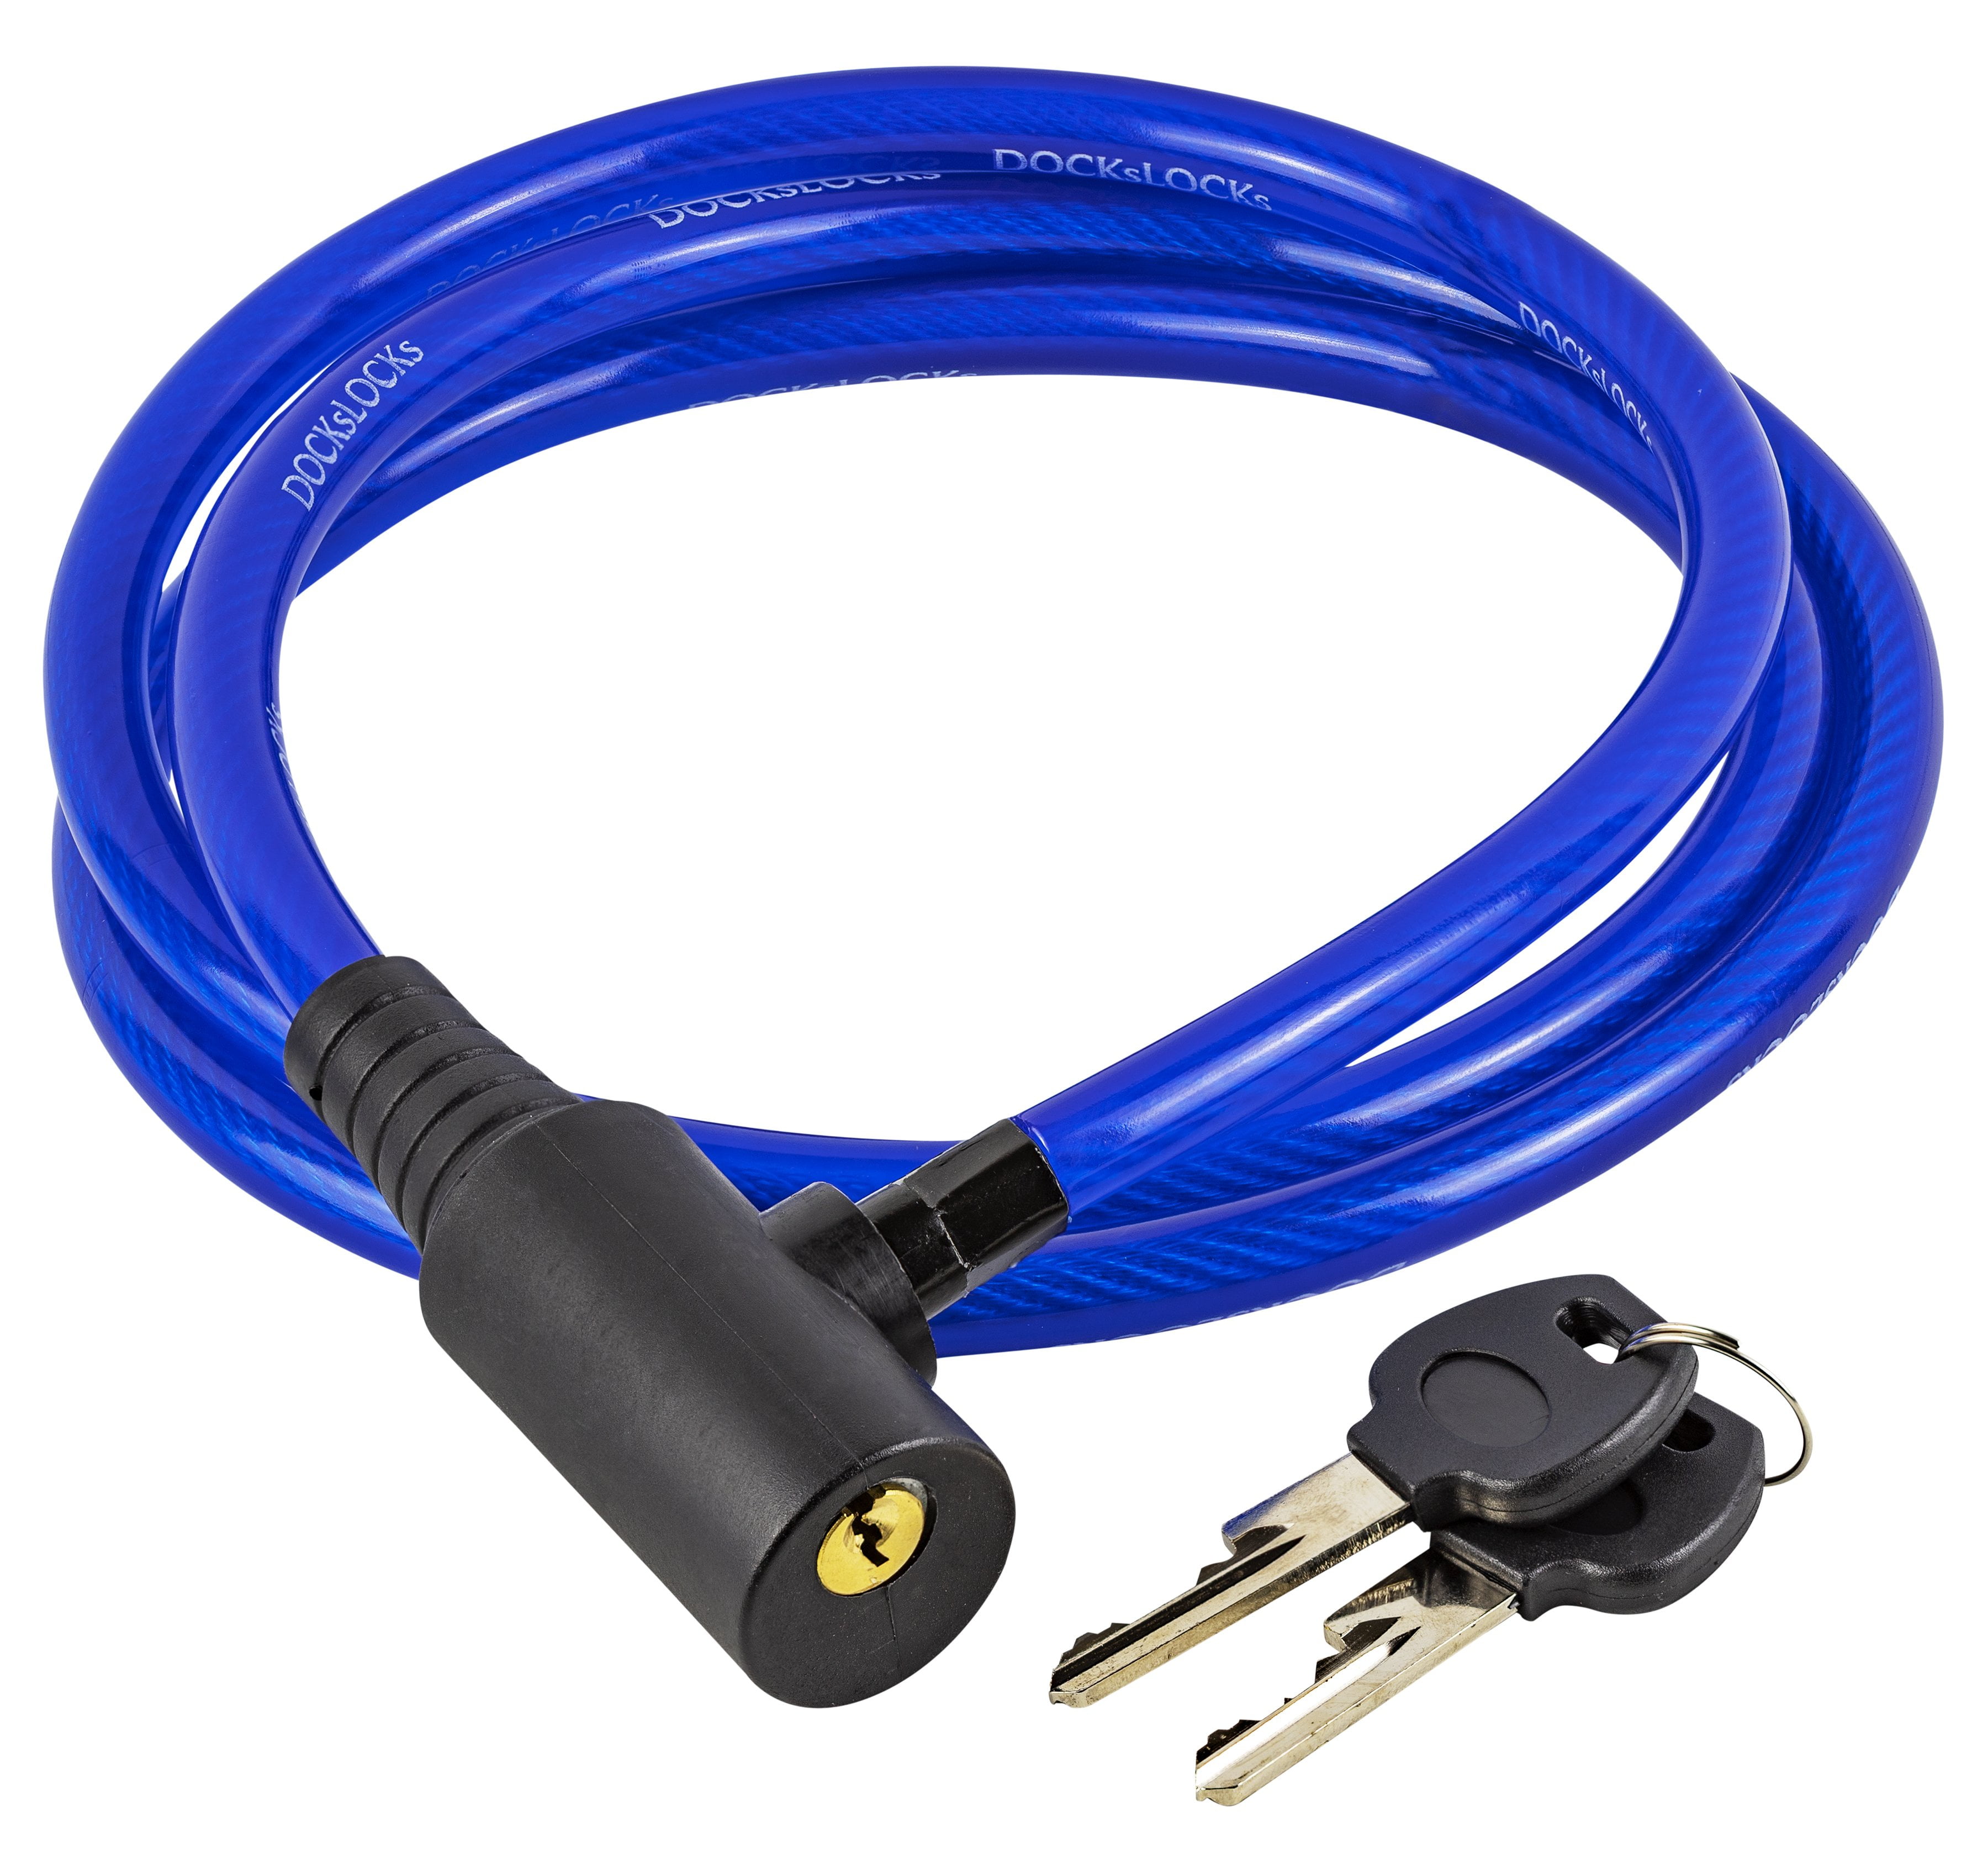 DocksLocks Anti-Theft Weatherproof Straight Security Cable with Resettable Combination Lock